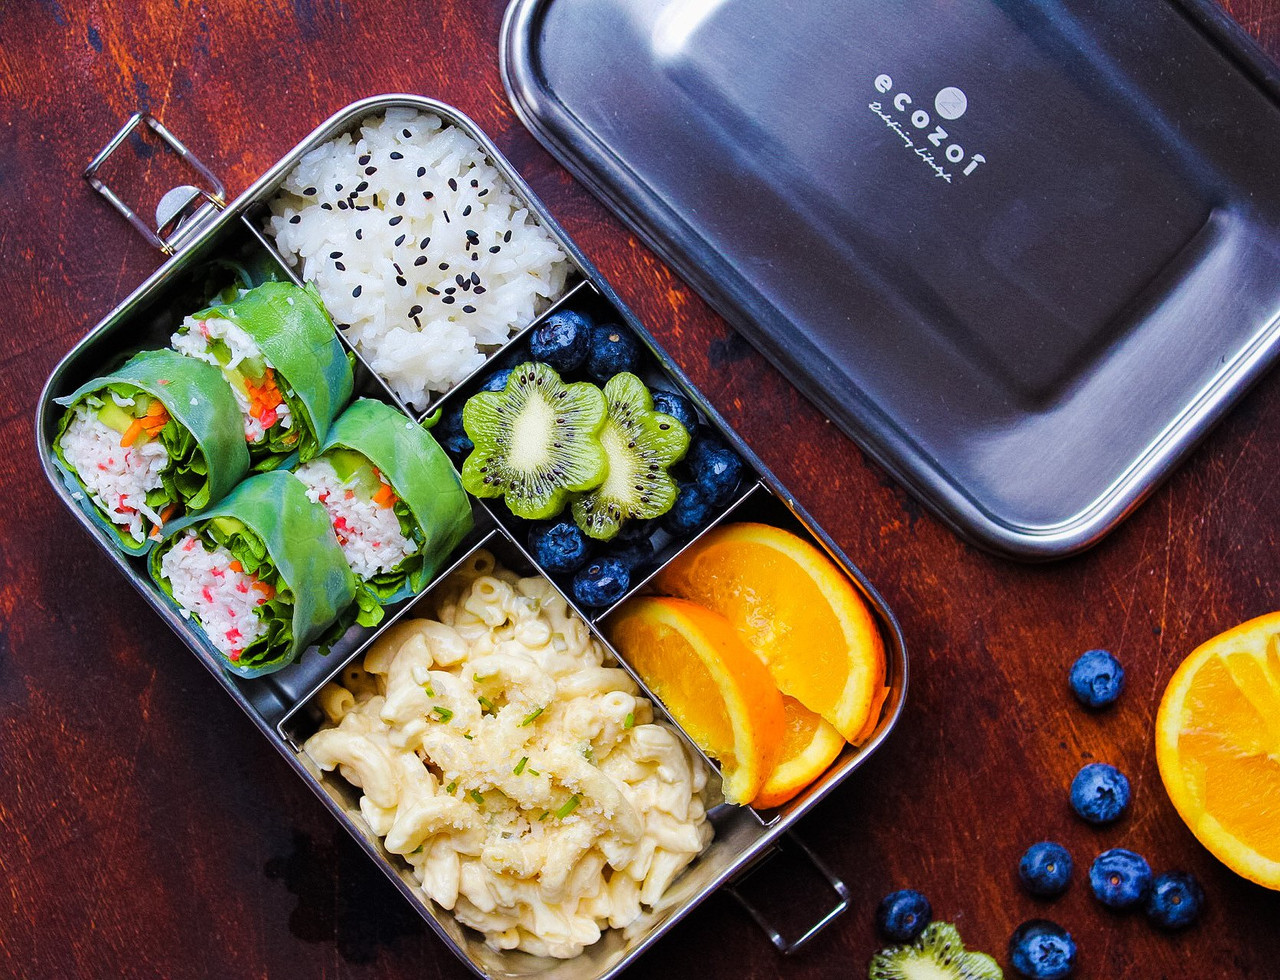 Stainless Steel Large Cinco Bento Lunch Box